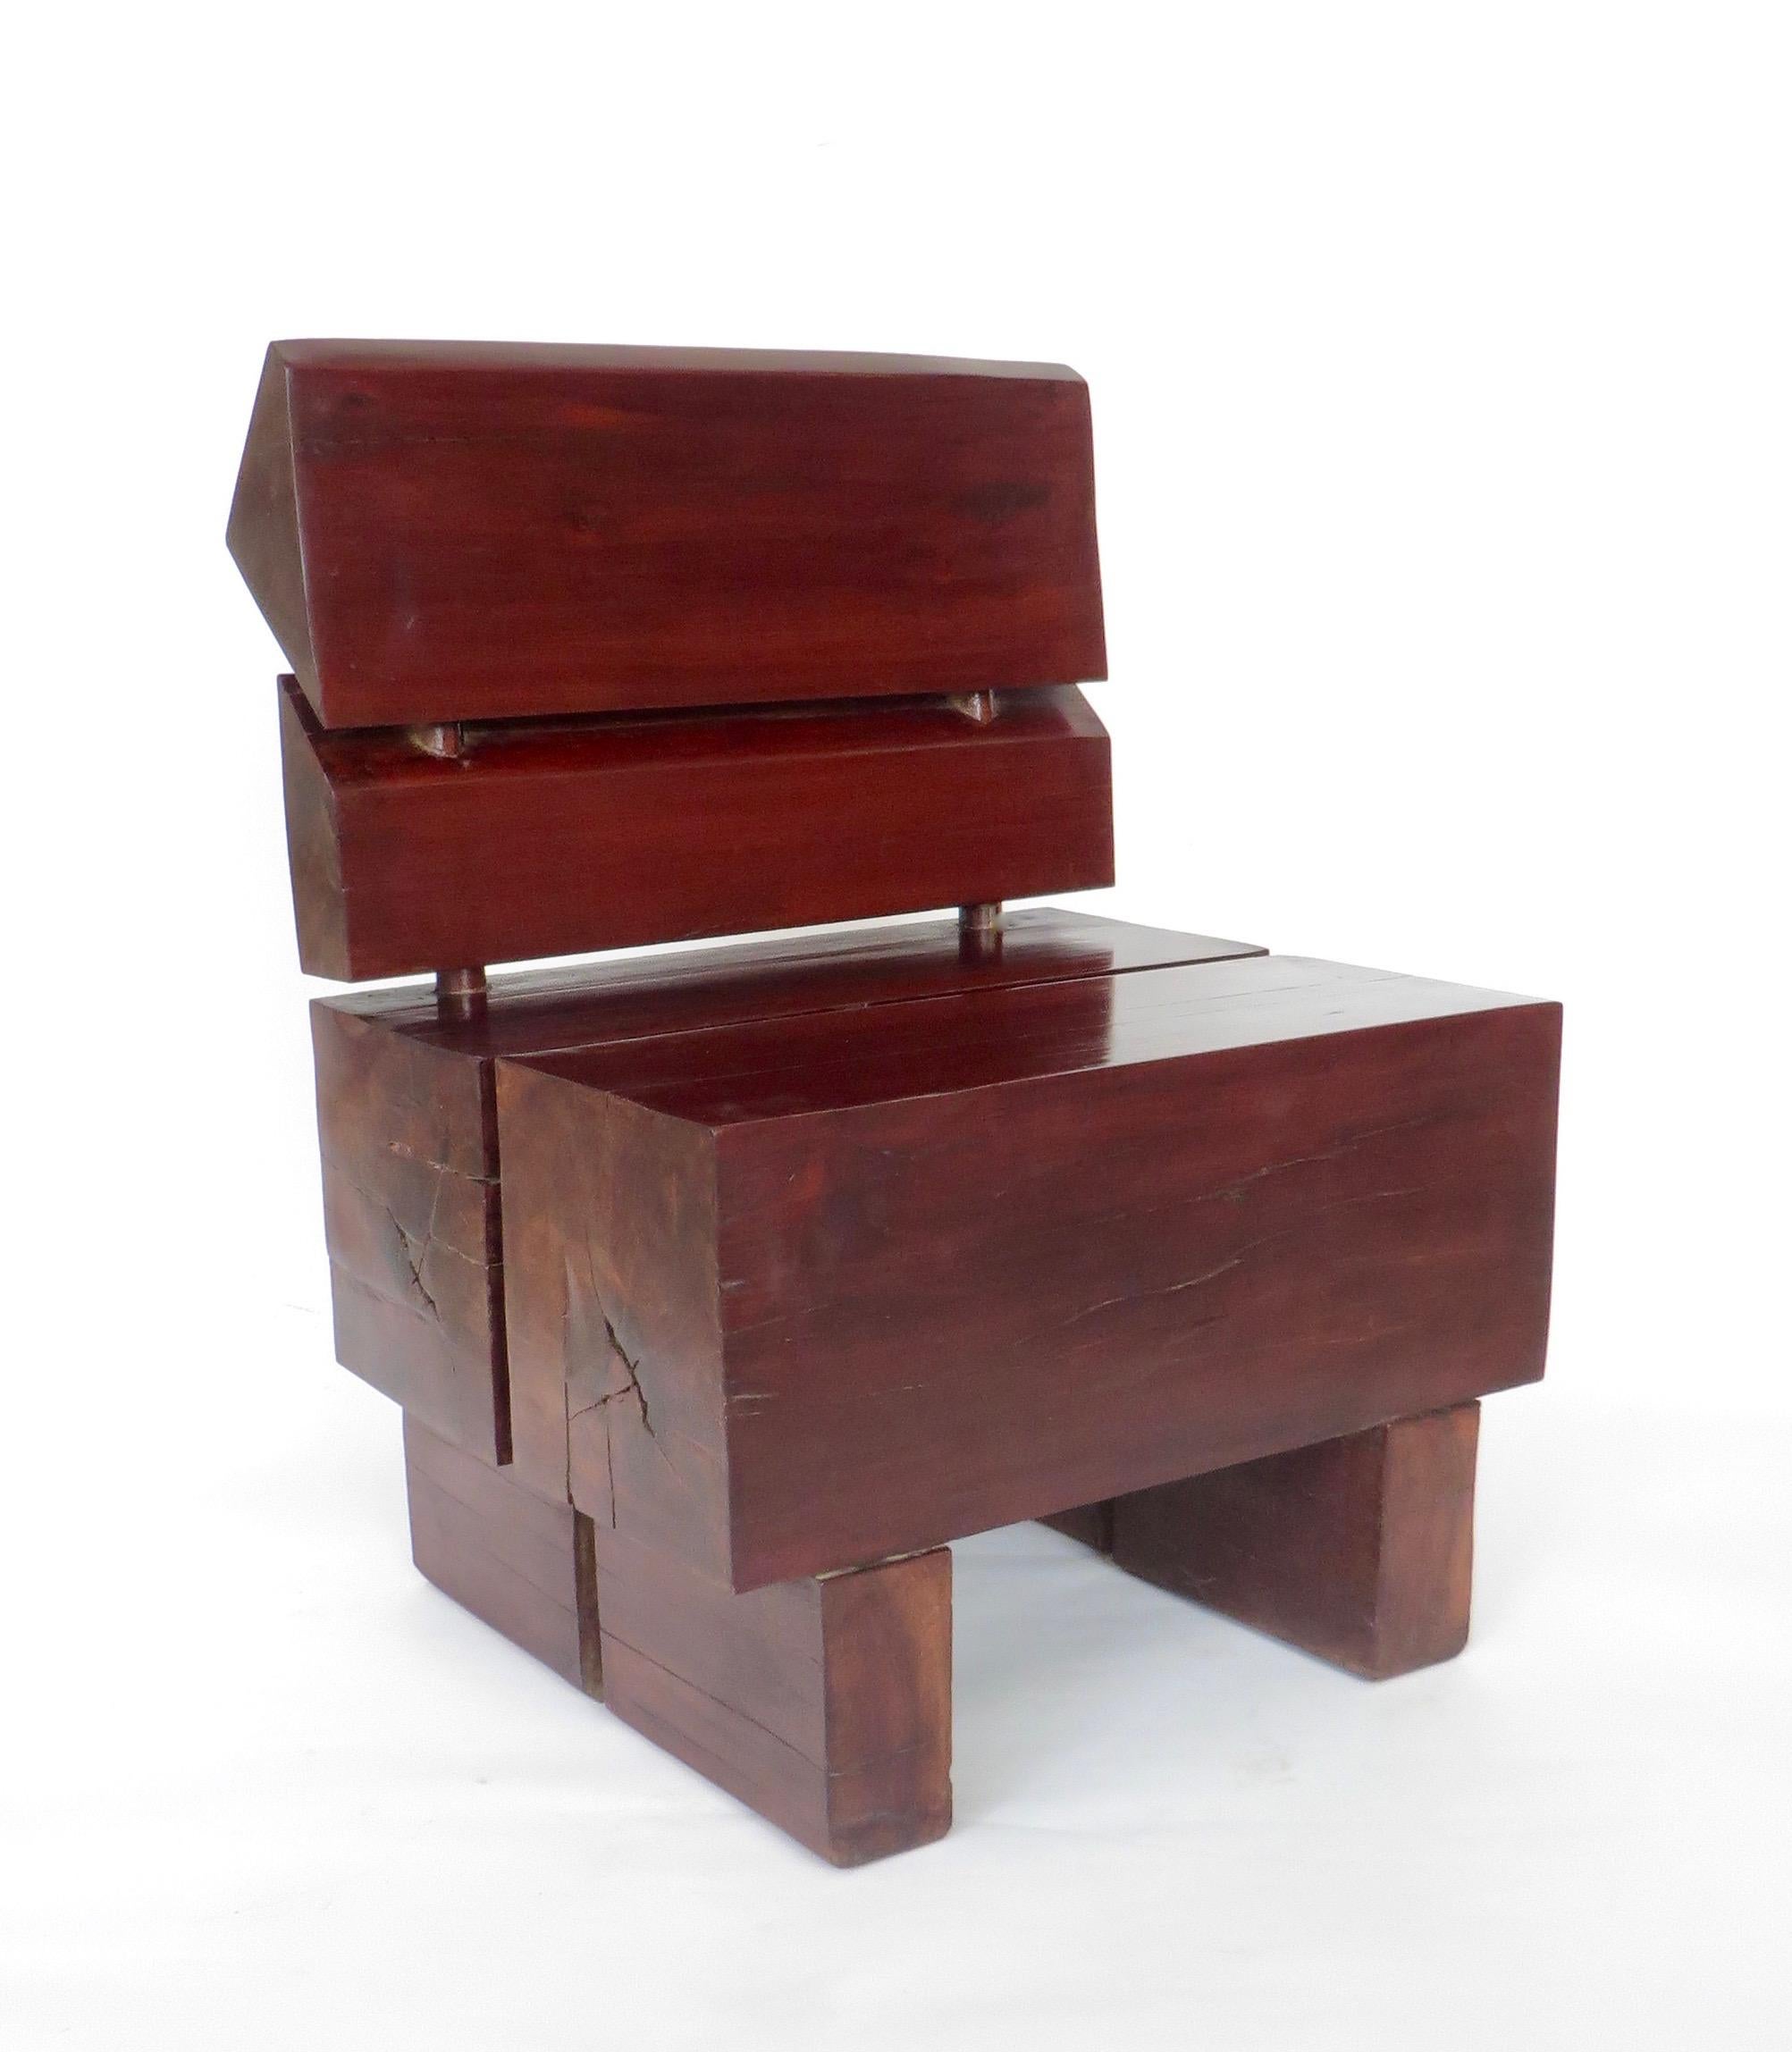 This Brazilian rosewood organic modernist low chair in the style of Jose Zanine de Caldas presents as much as a sculpture as a chair.
It is heavy and organic constructed from large monumental pieces of wood.
The seat being two massive sections of